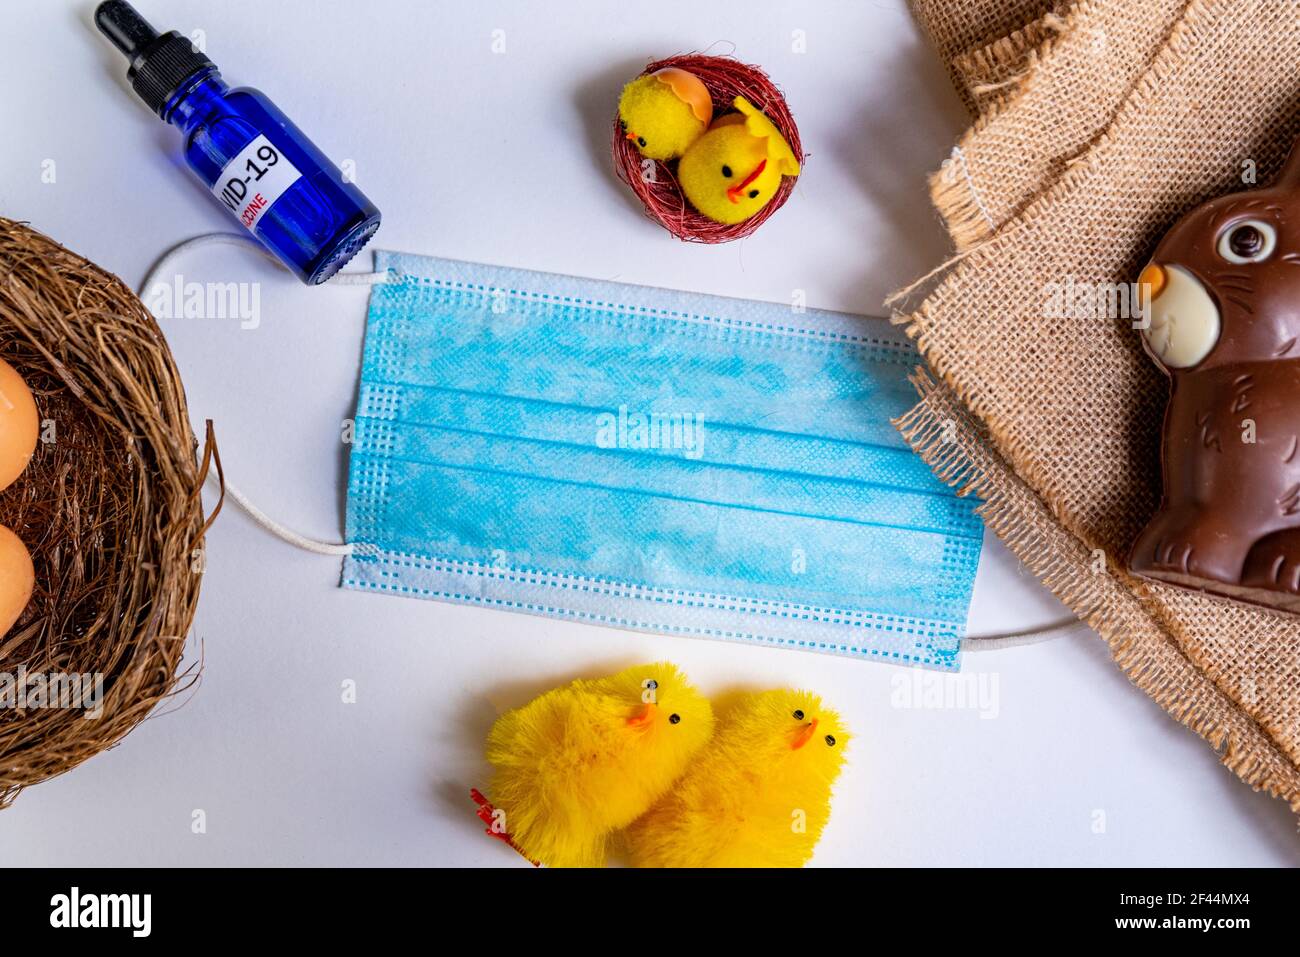 covid19 easter and concept. flat lay with face mask and covid vaccine with easter symbols like easter eggs and chocolate bunny Stock Photo